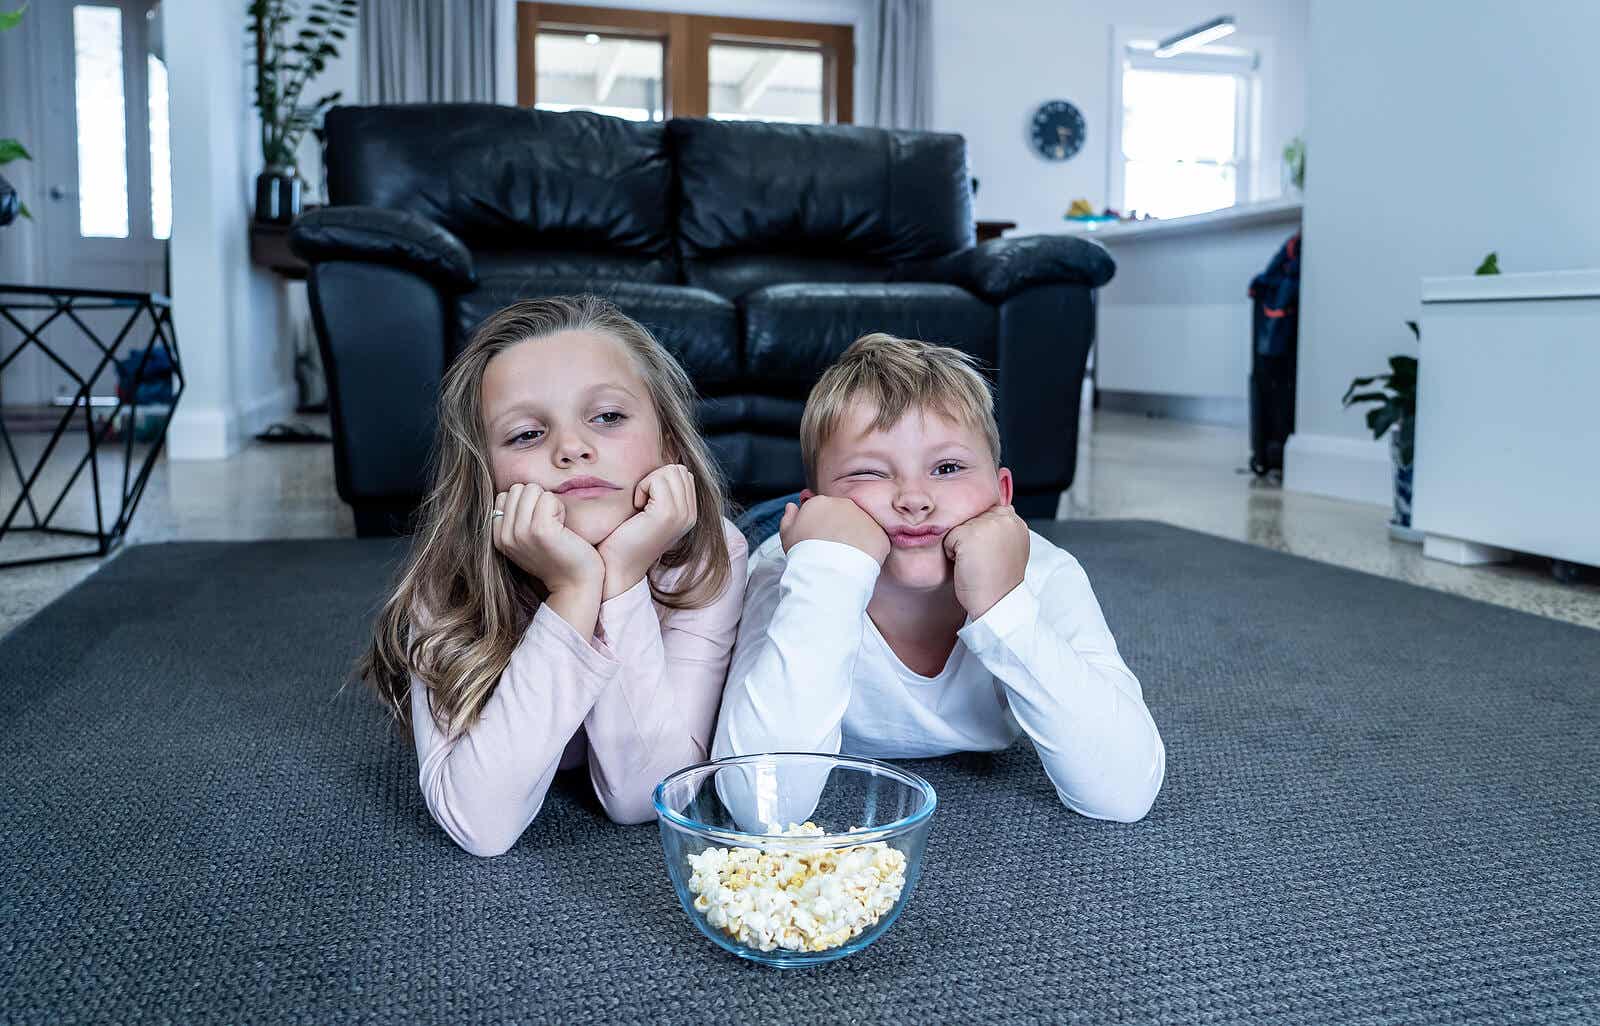 Two bored children eating popcorn in front of the TV.